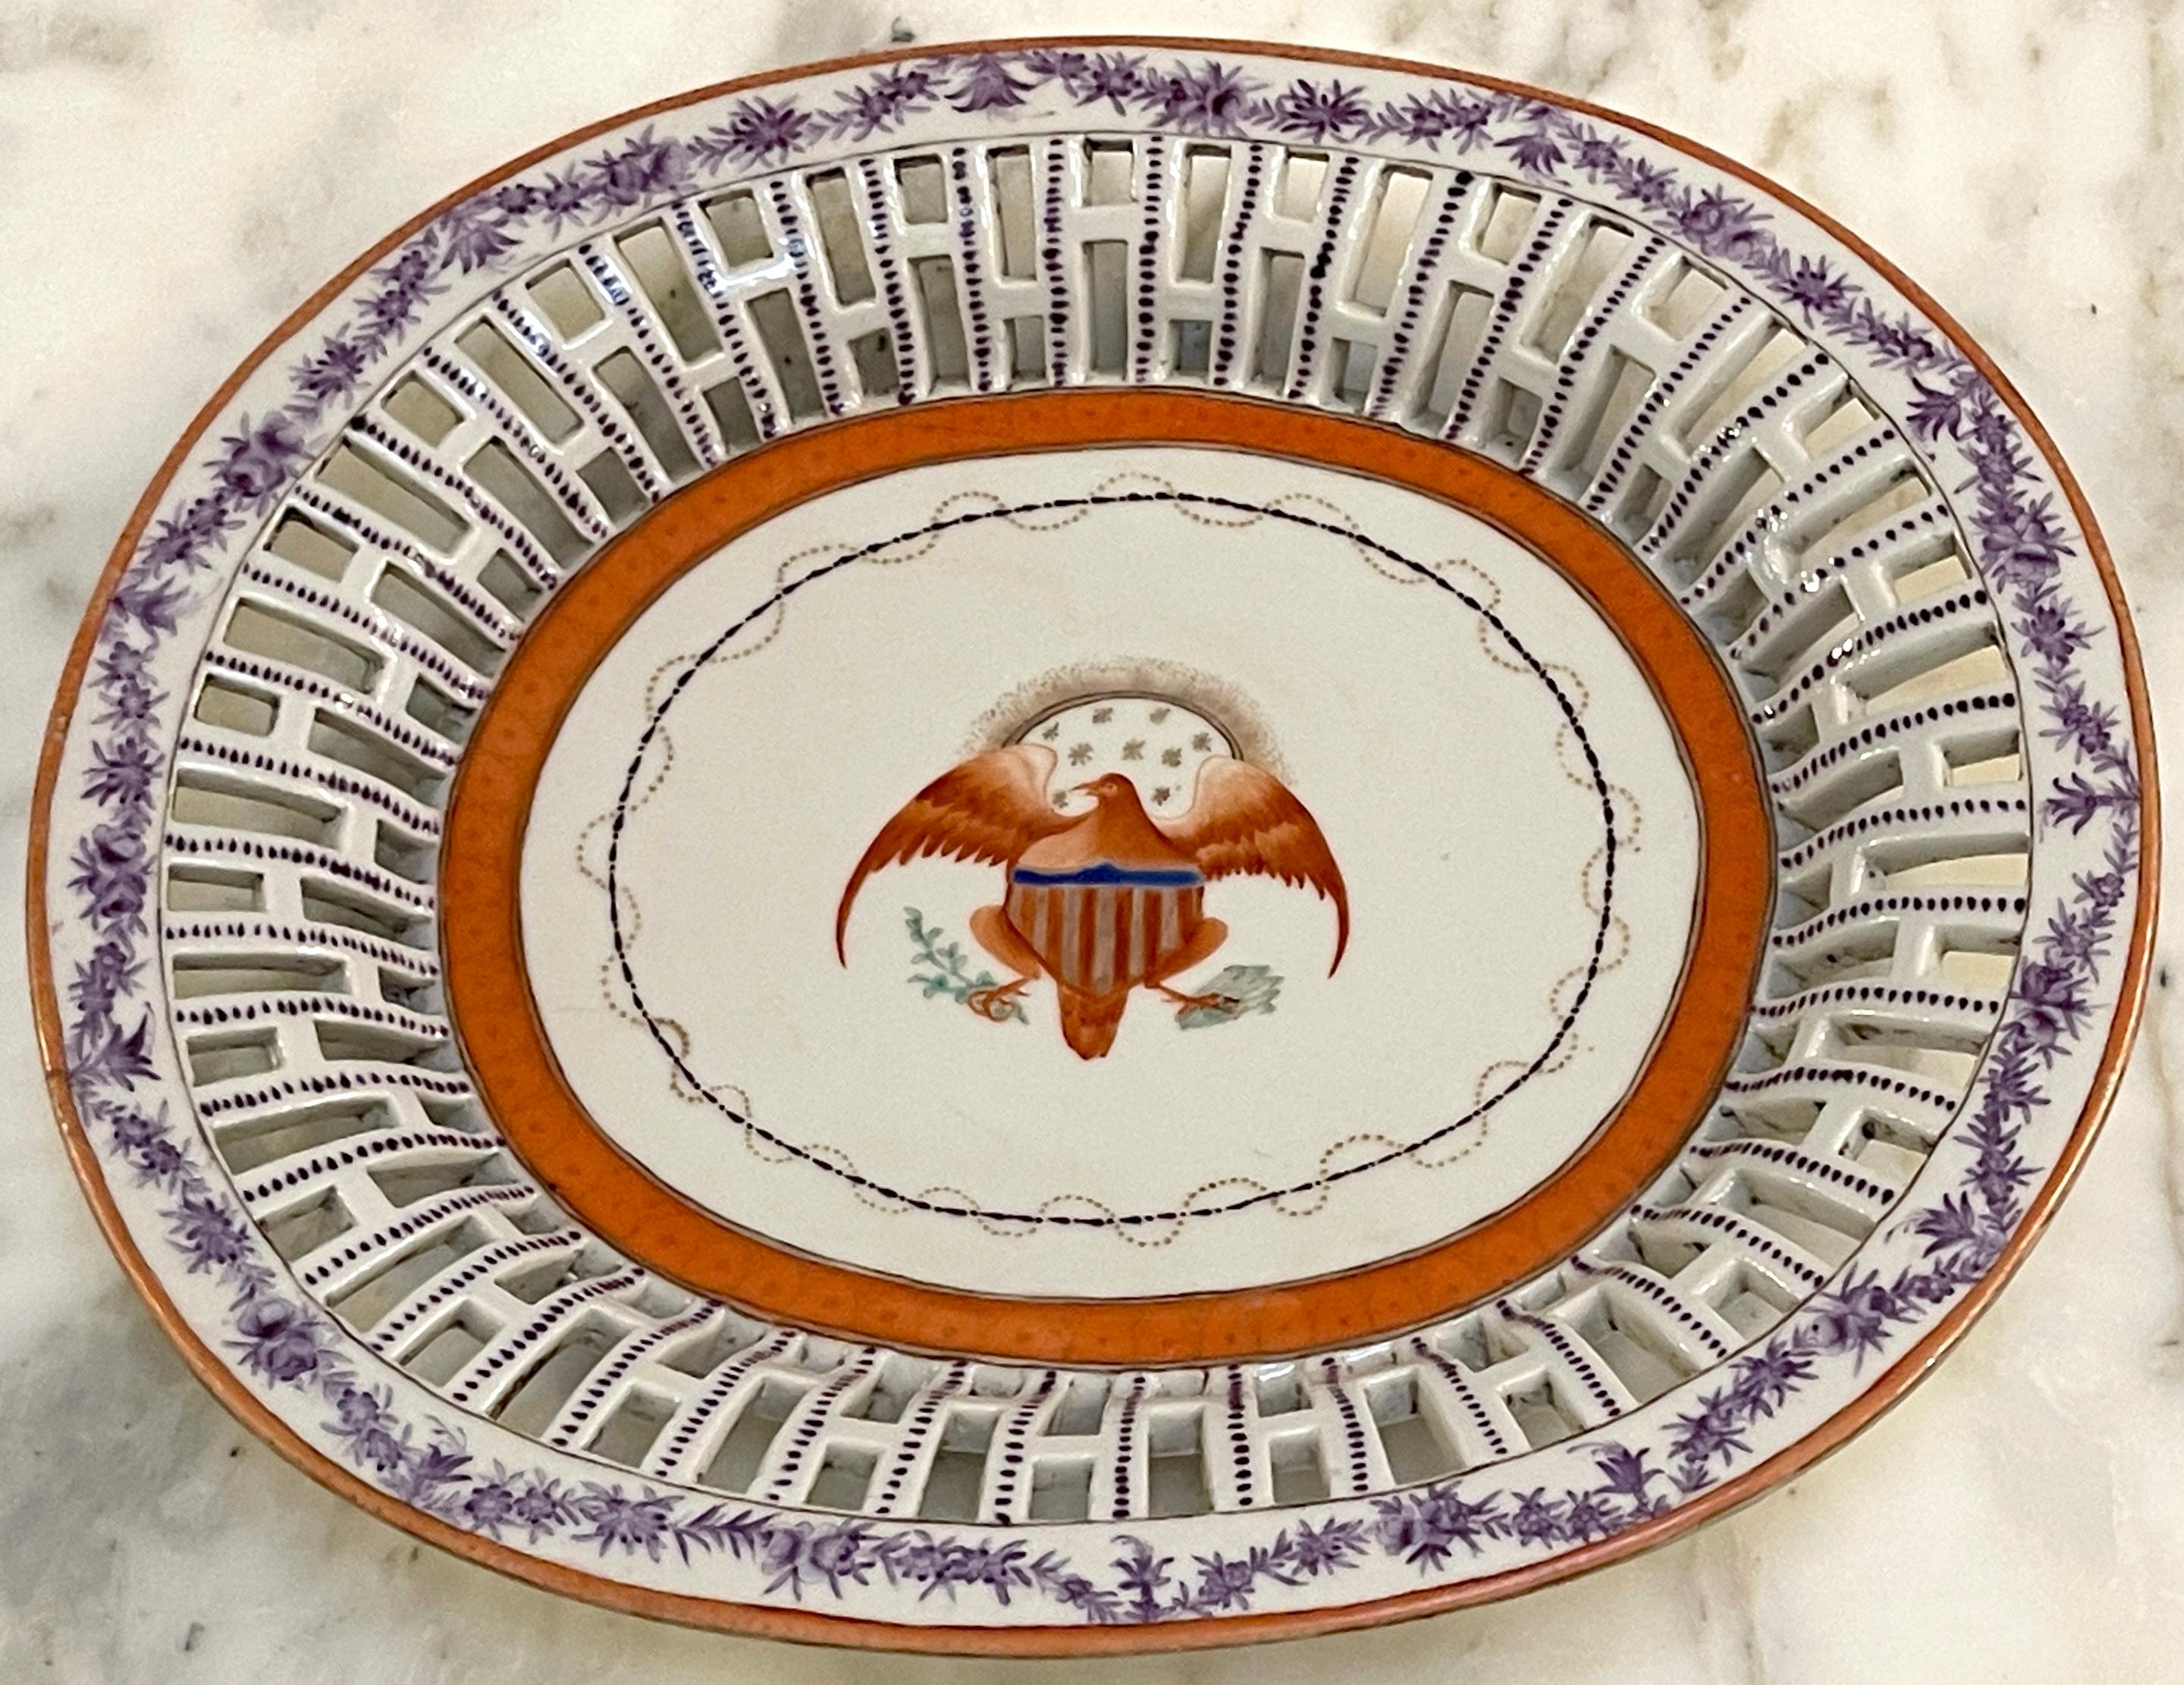 American Market Chinese Export Eagle Armorial Porcelain Oval Reticulated Tray
China, 19th Century 

This exquisite 19th-century Chinese Export Eagle Armorial Porcelain Oval Reticulated Tray, made for the American market, stands as a testament to the